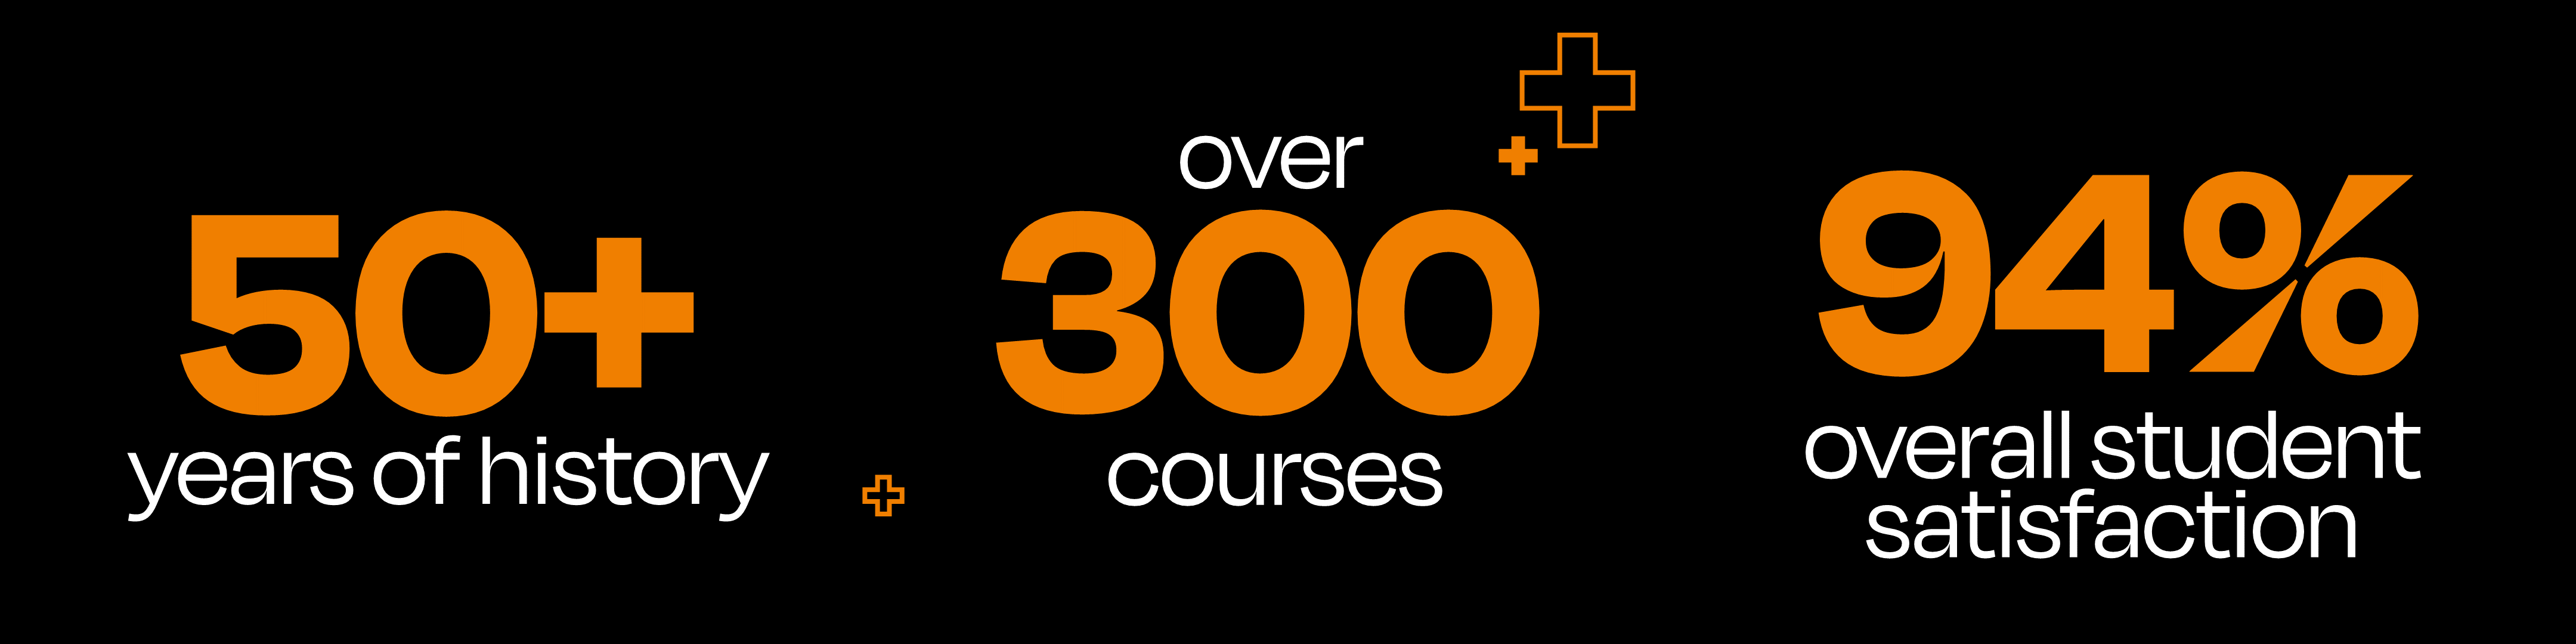 Graphic of three stats 50+ years of history, over 300 courses, 94% overall student satisfaction.